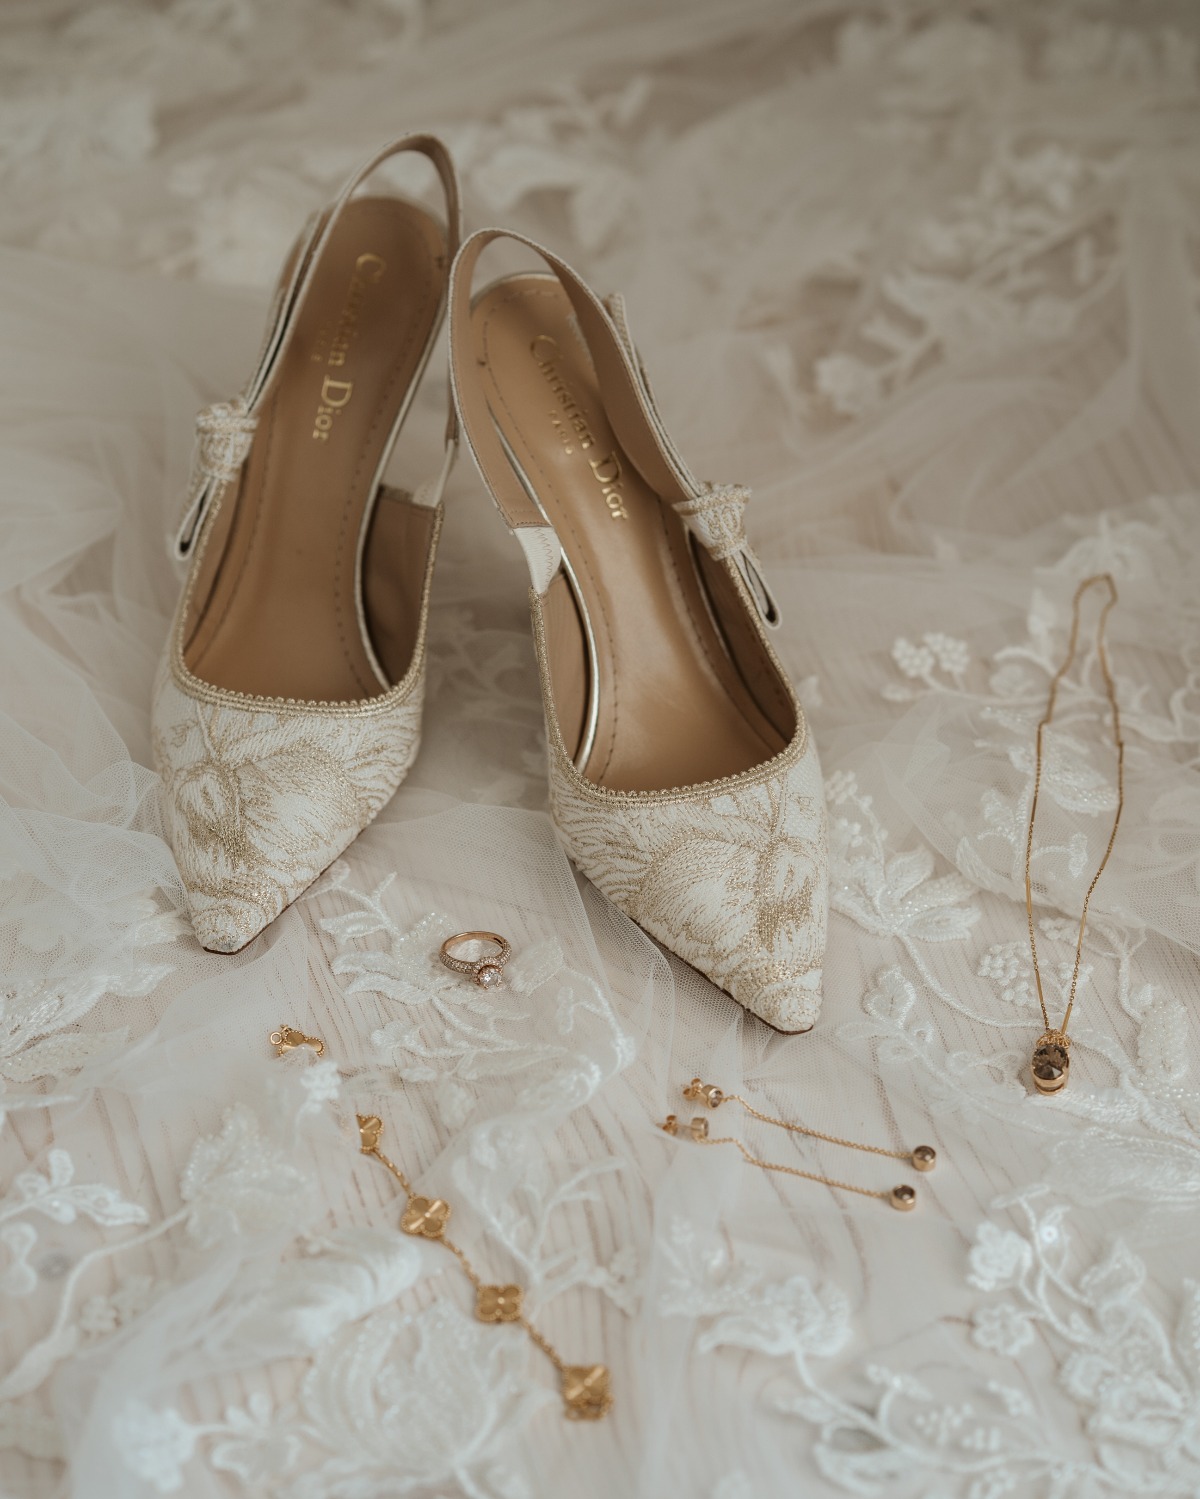 floral-inspired wedding shoes